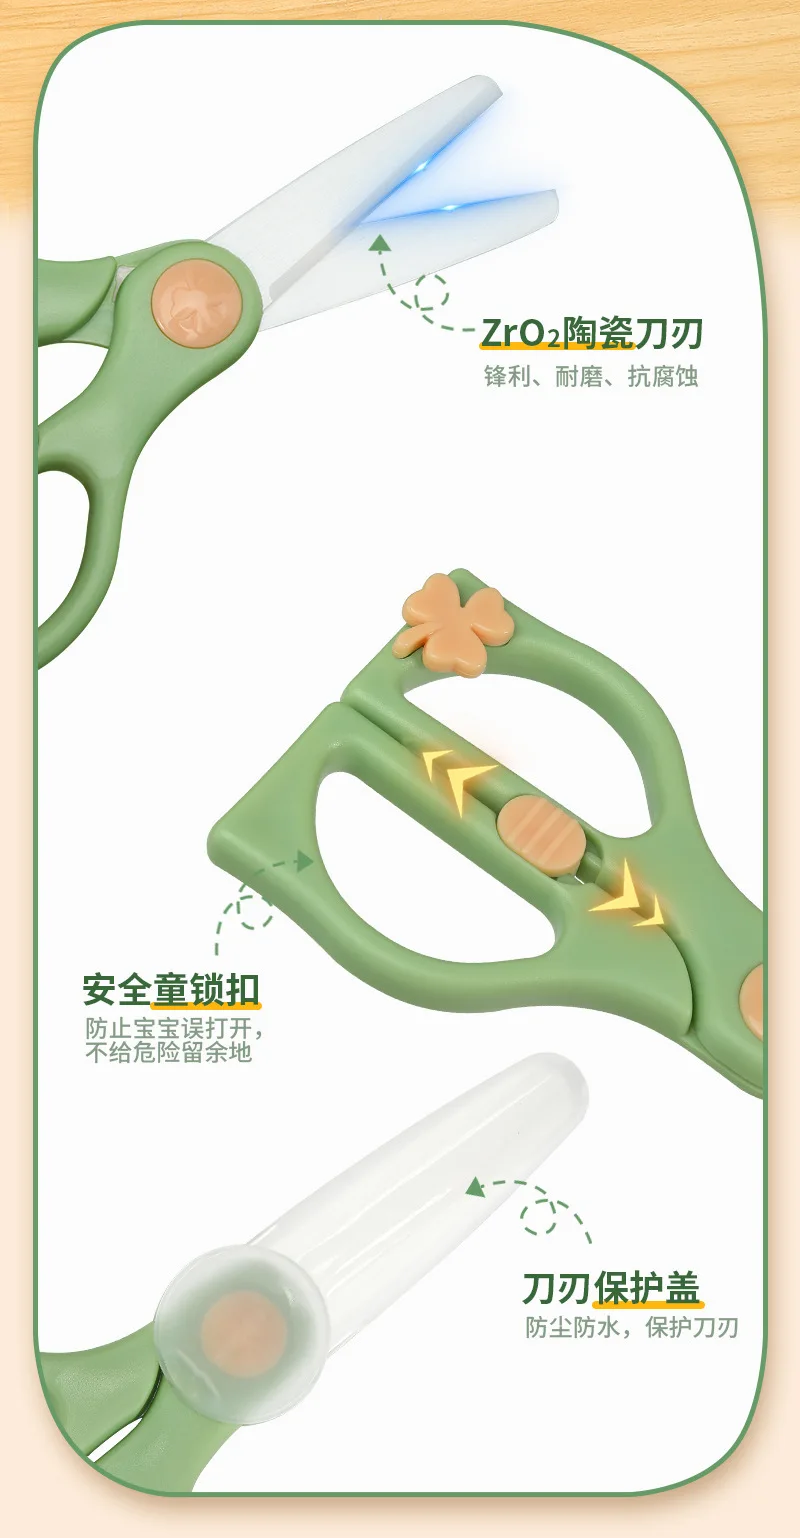 Safety Protection Food Scissors Safety Lock Portable Children's